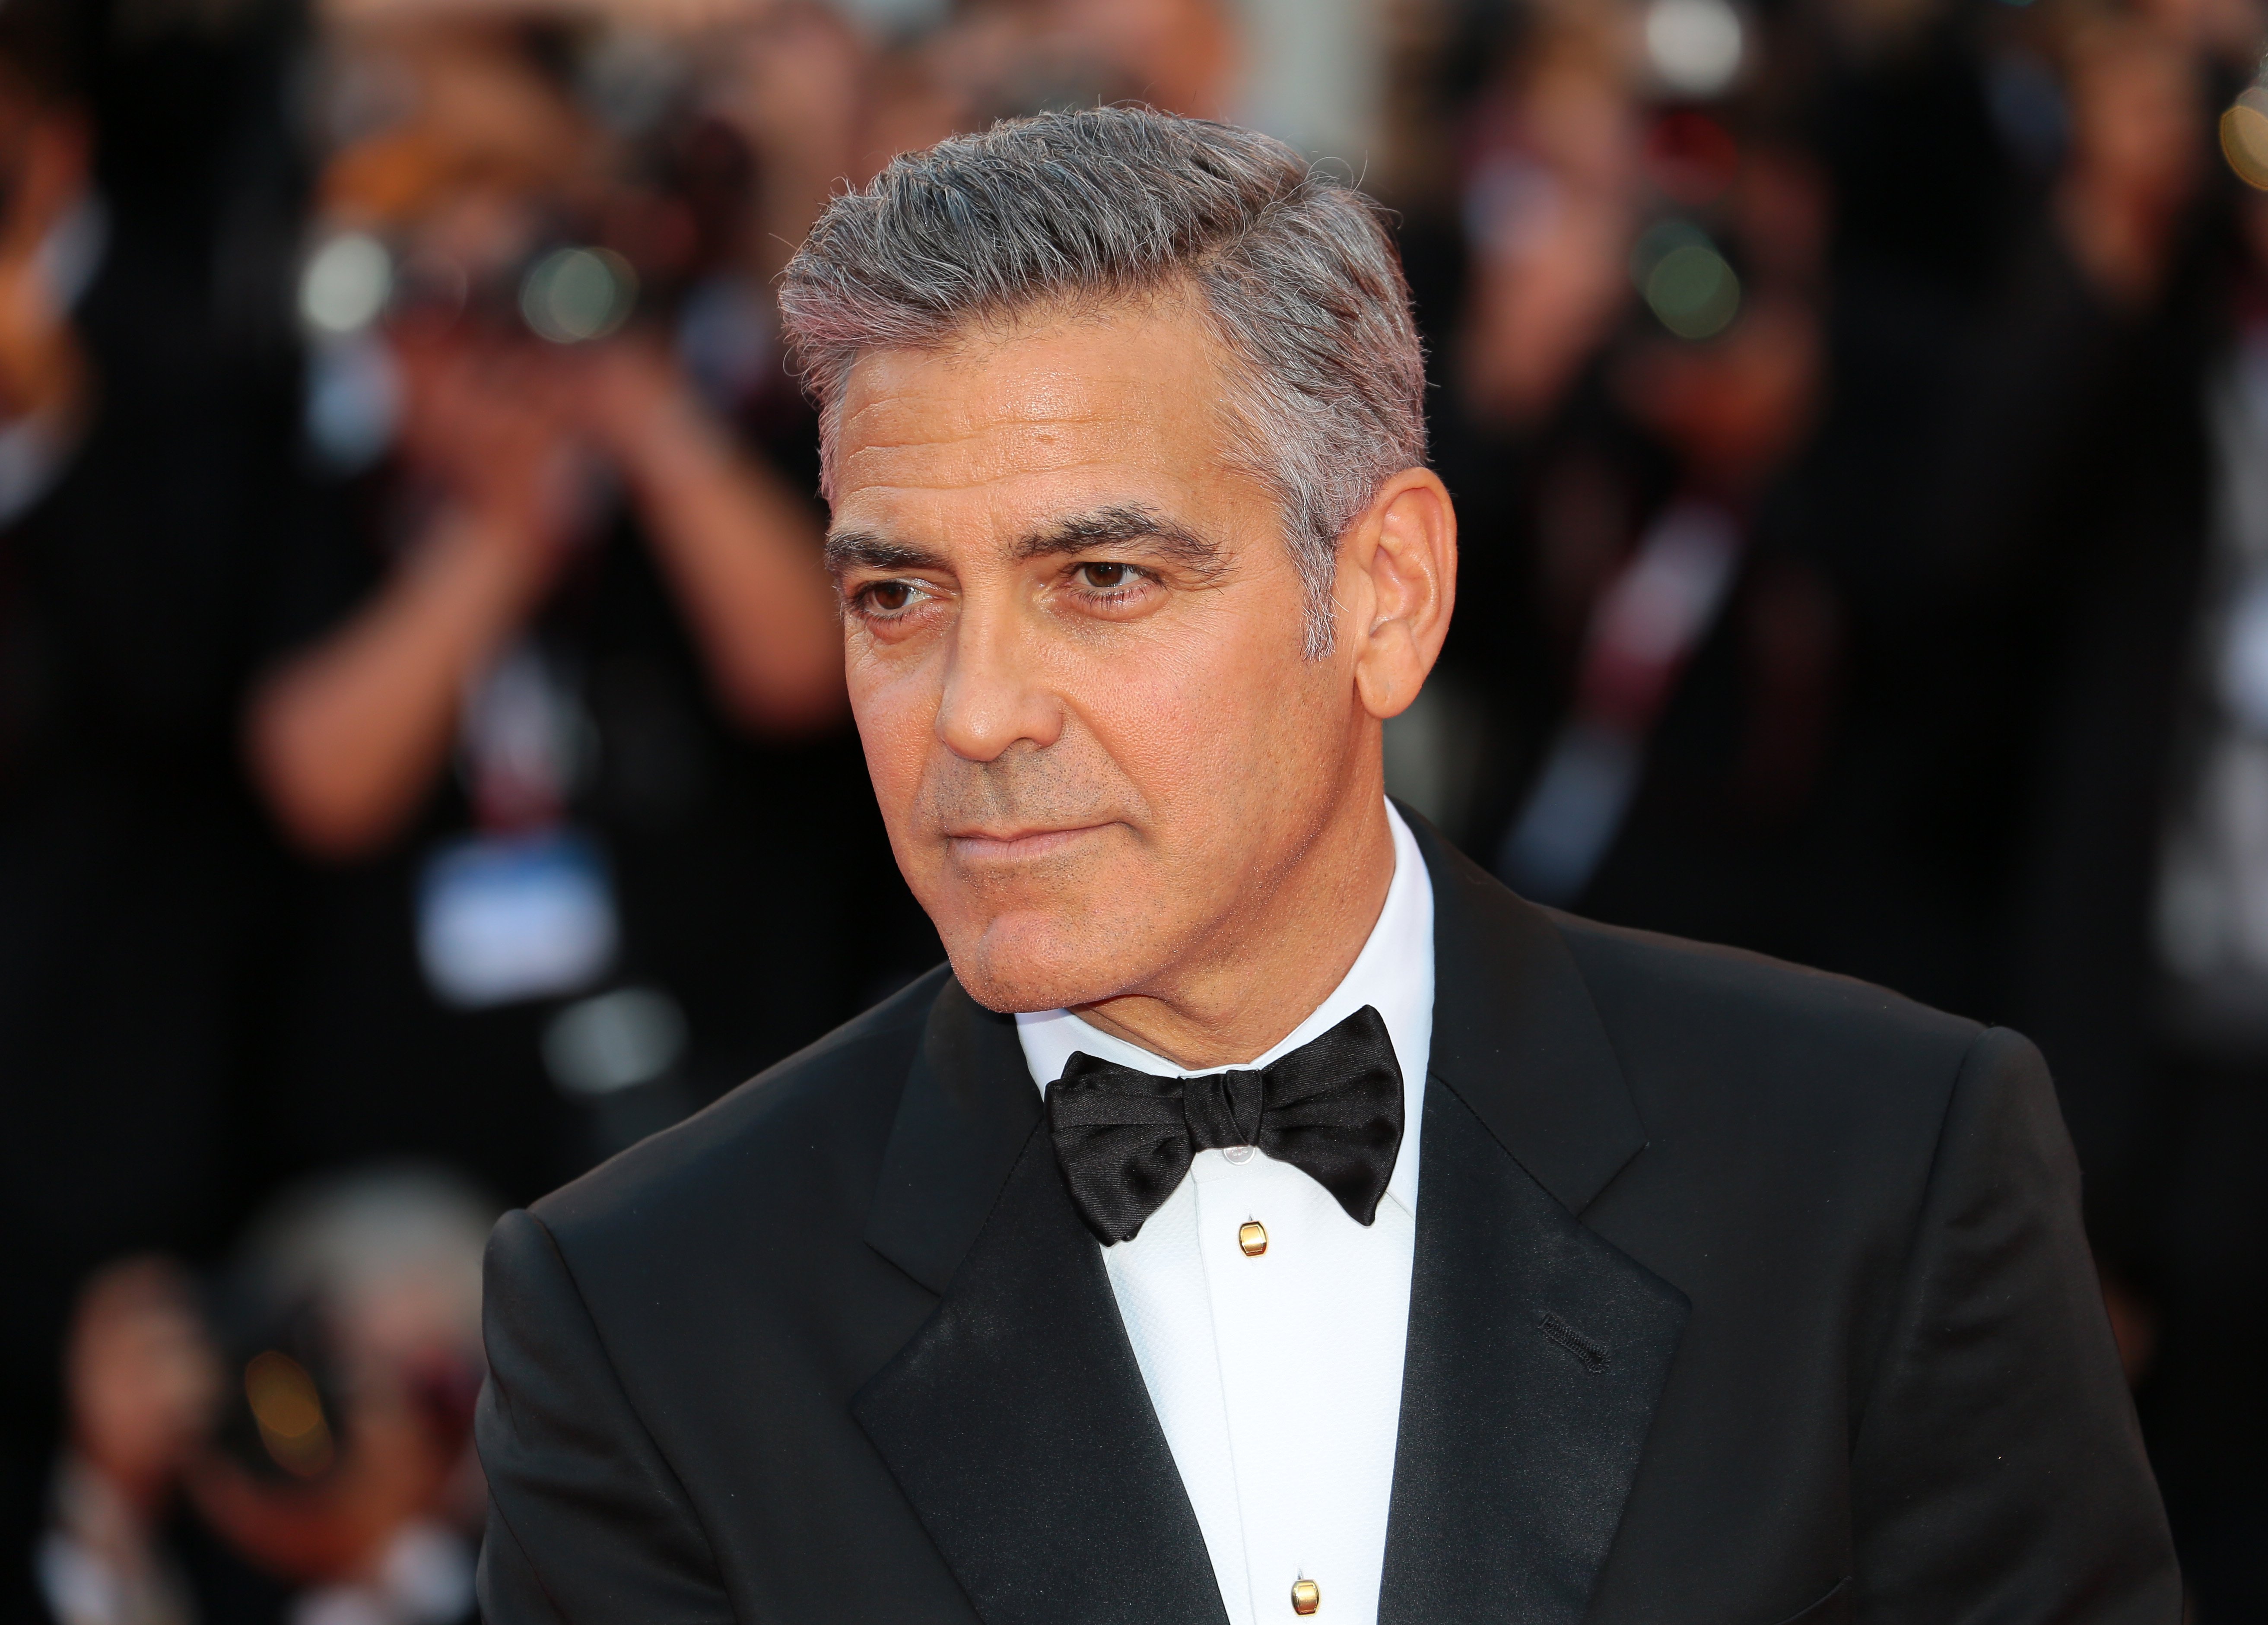 George Clooney looking dashing at the premiere of "Gravity', in Venice, August, 2012. | Photo: Shutterstock. 